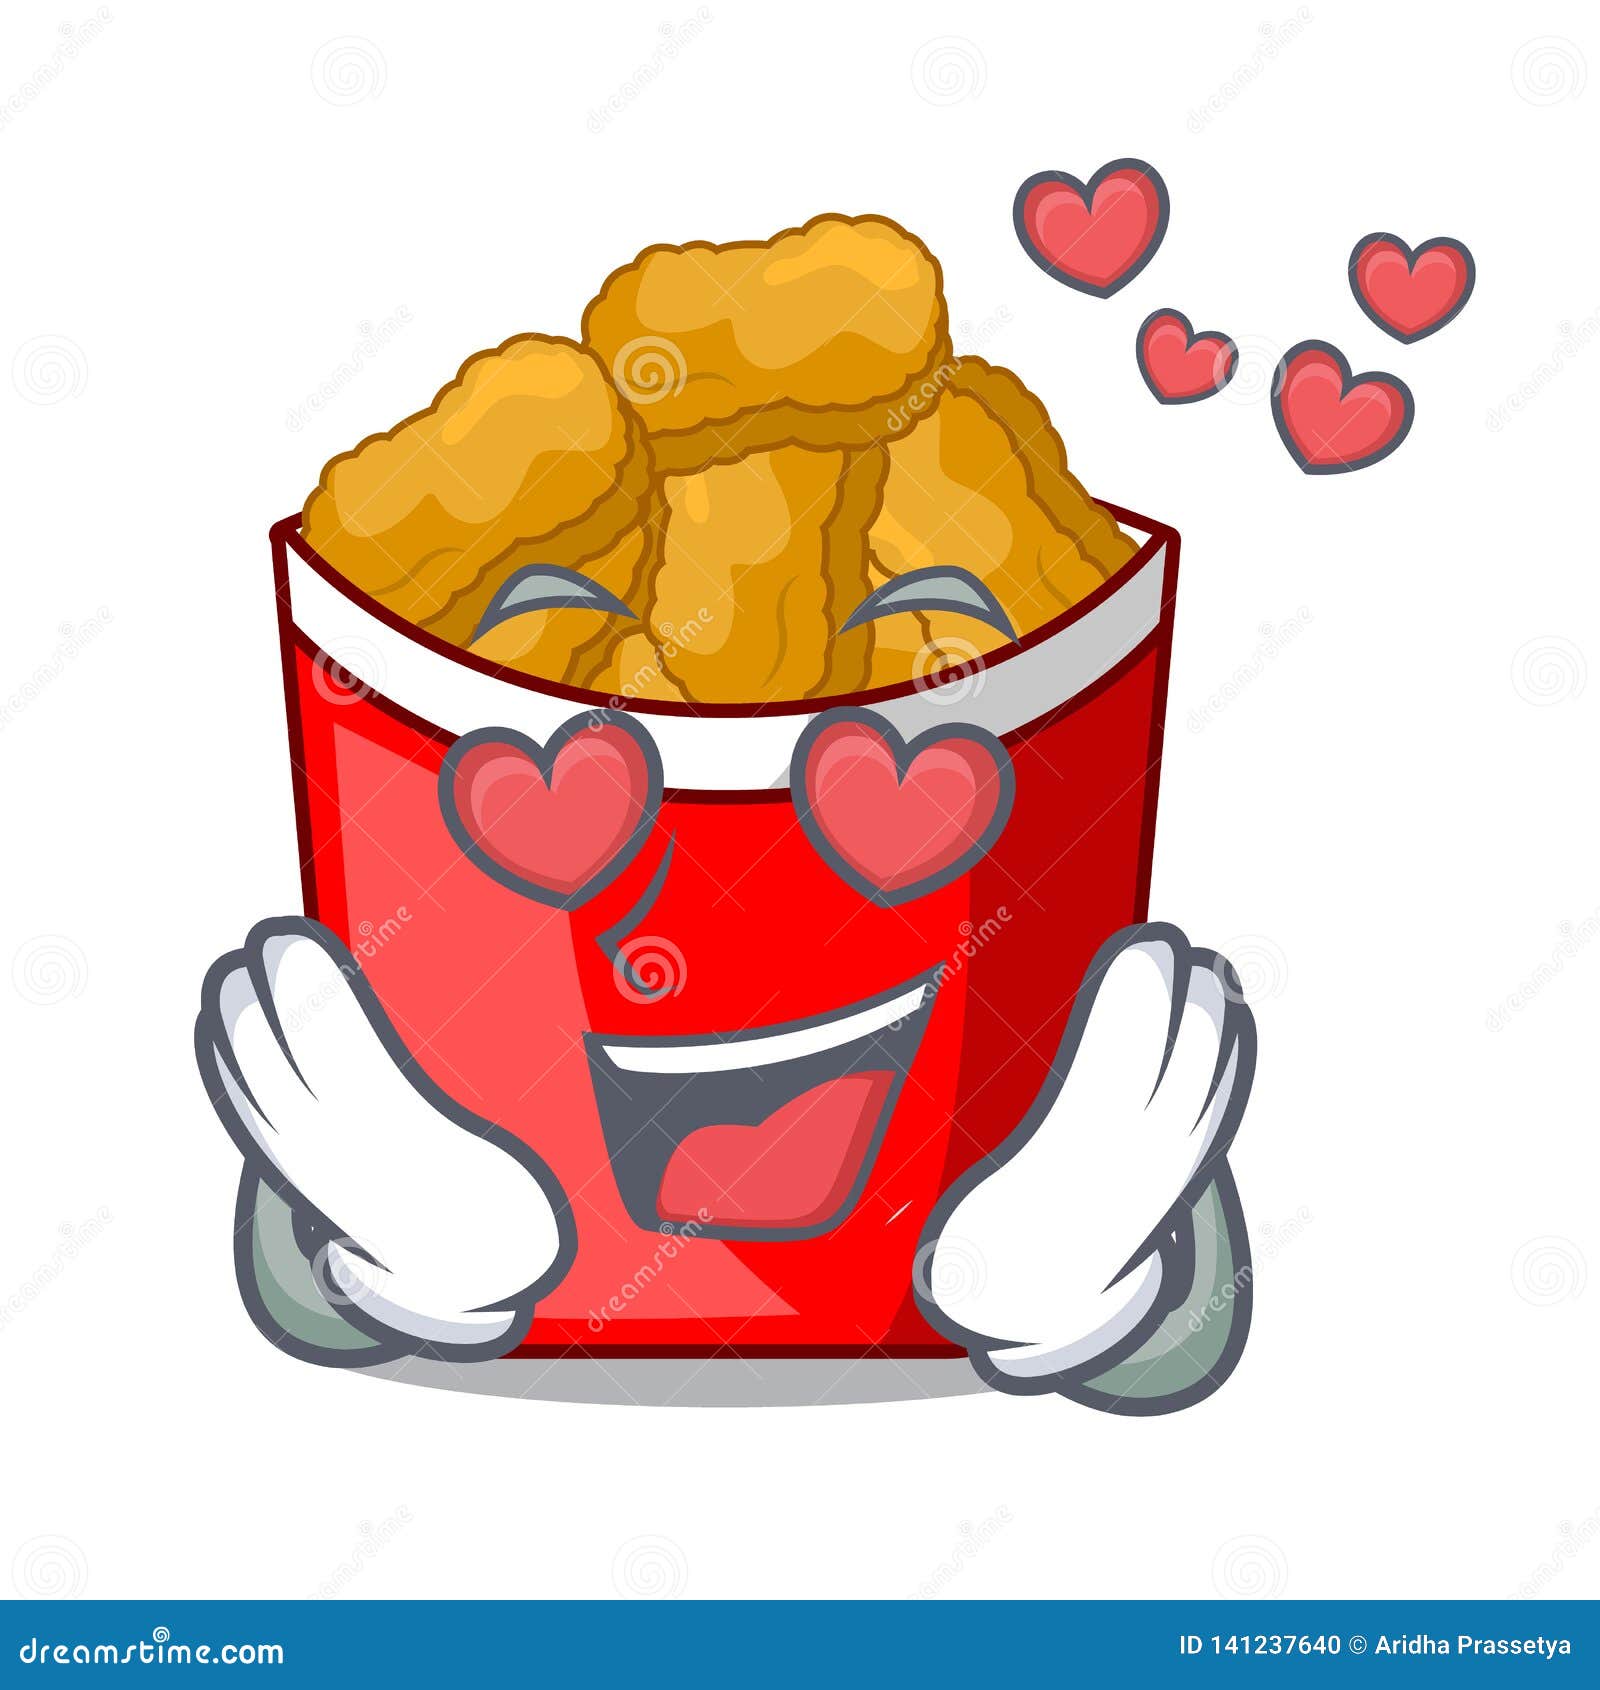 In Love Chicken Nuggets In The Cartoon Shape Stock Vector